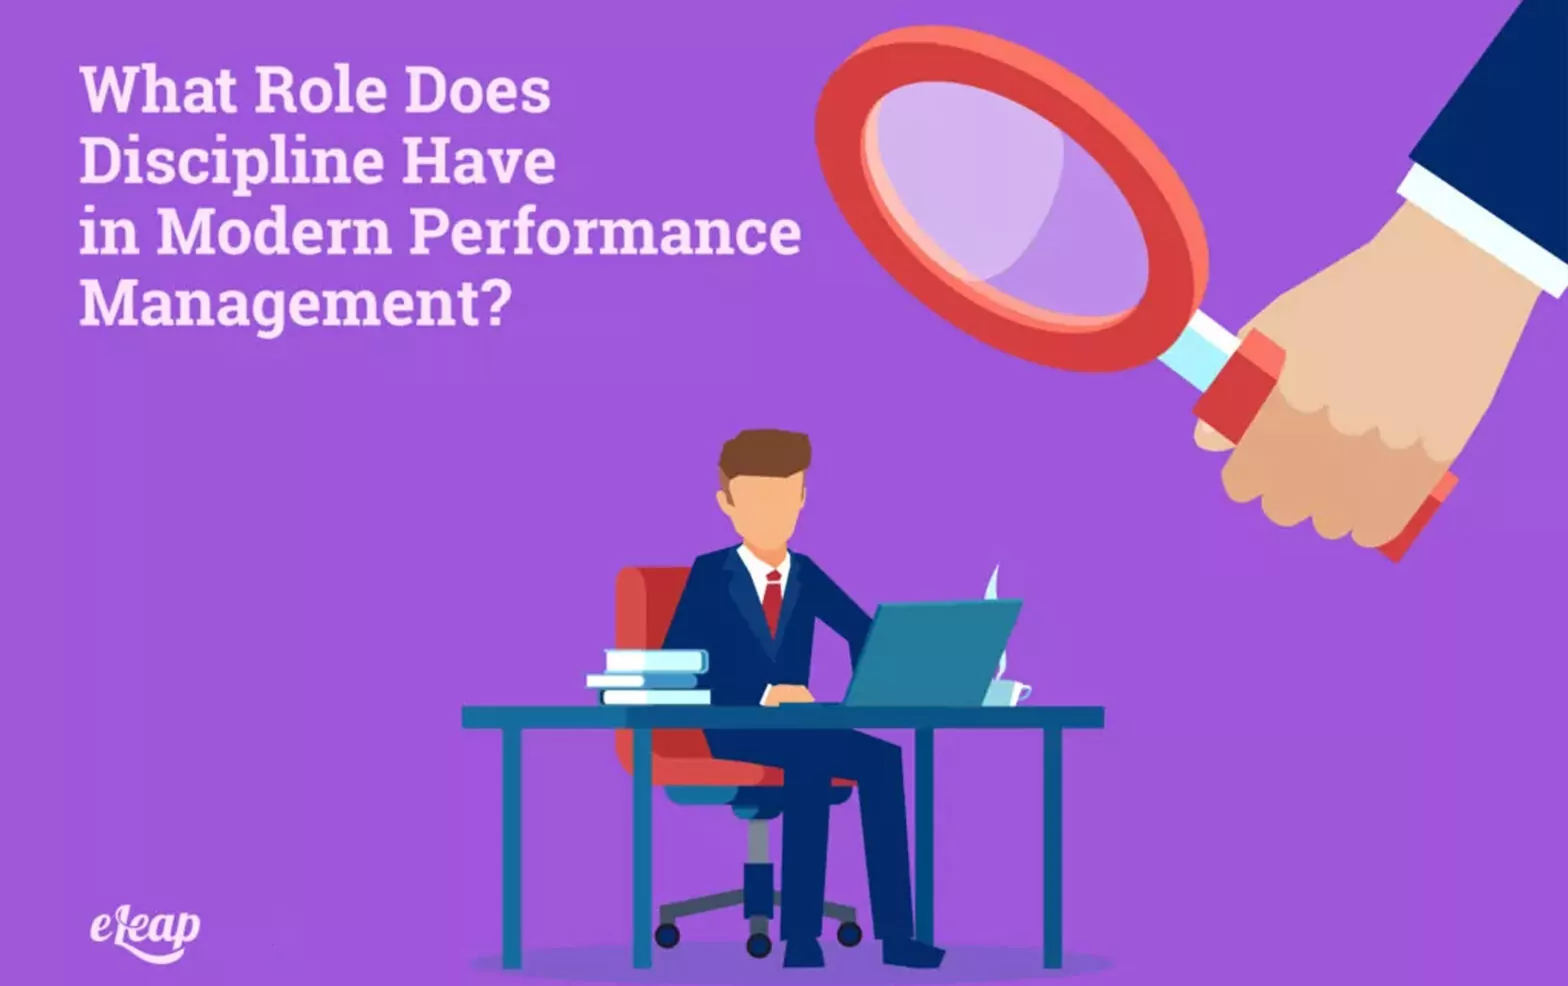 What Role Does Discipline Have in Modern Performance Management?